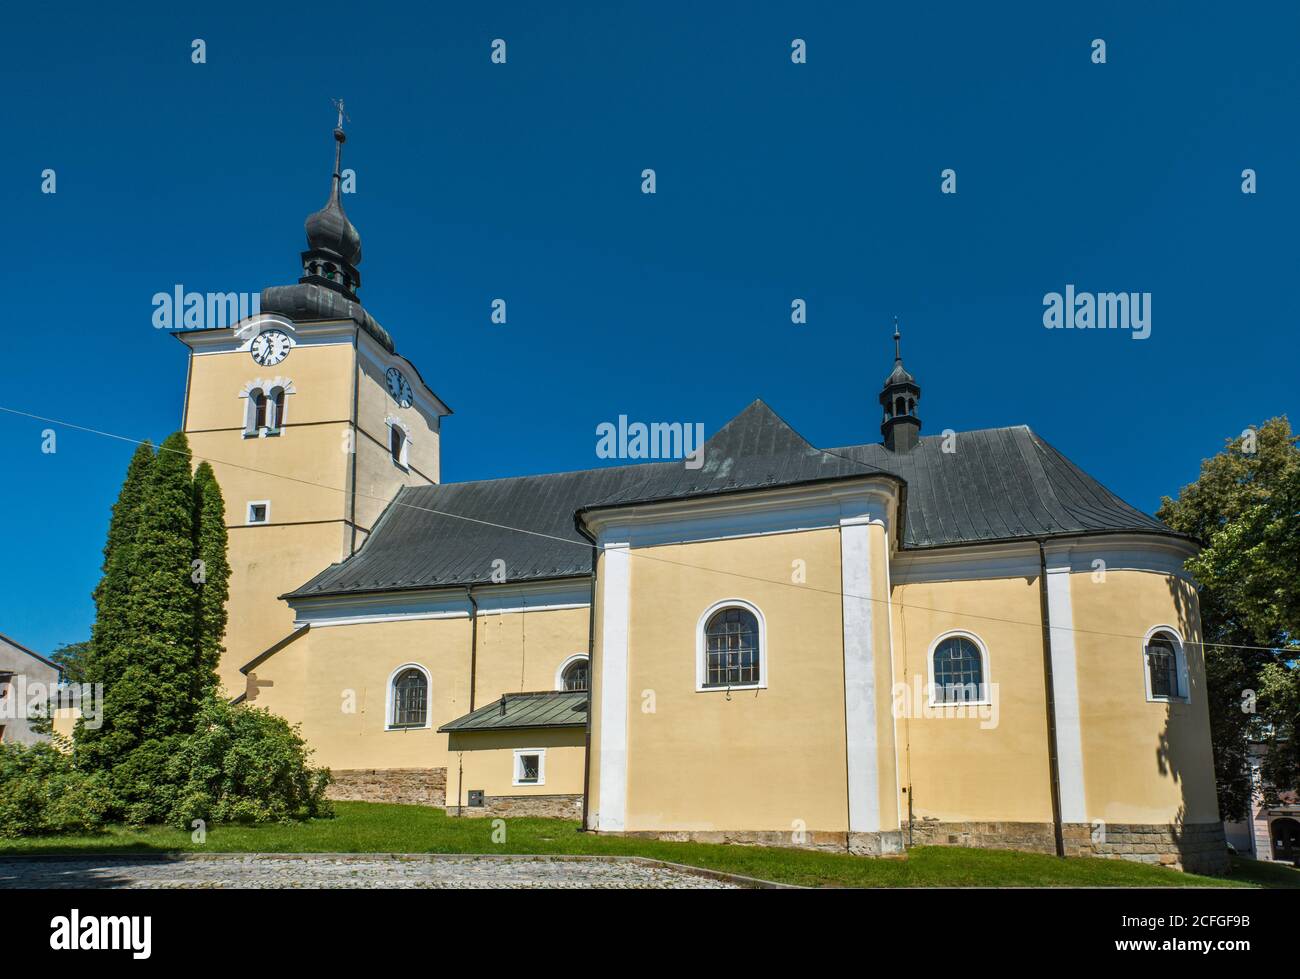 Valasske High Resolution Stock Photography and Images - Alamy